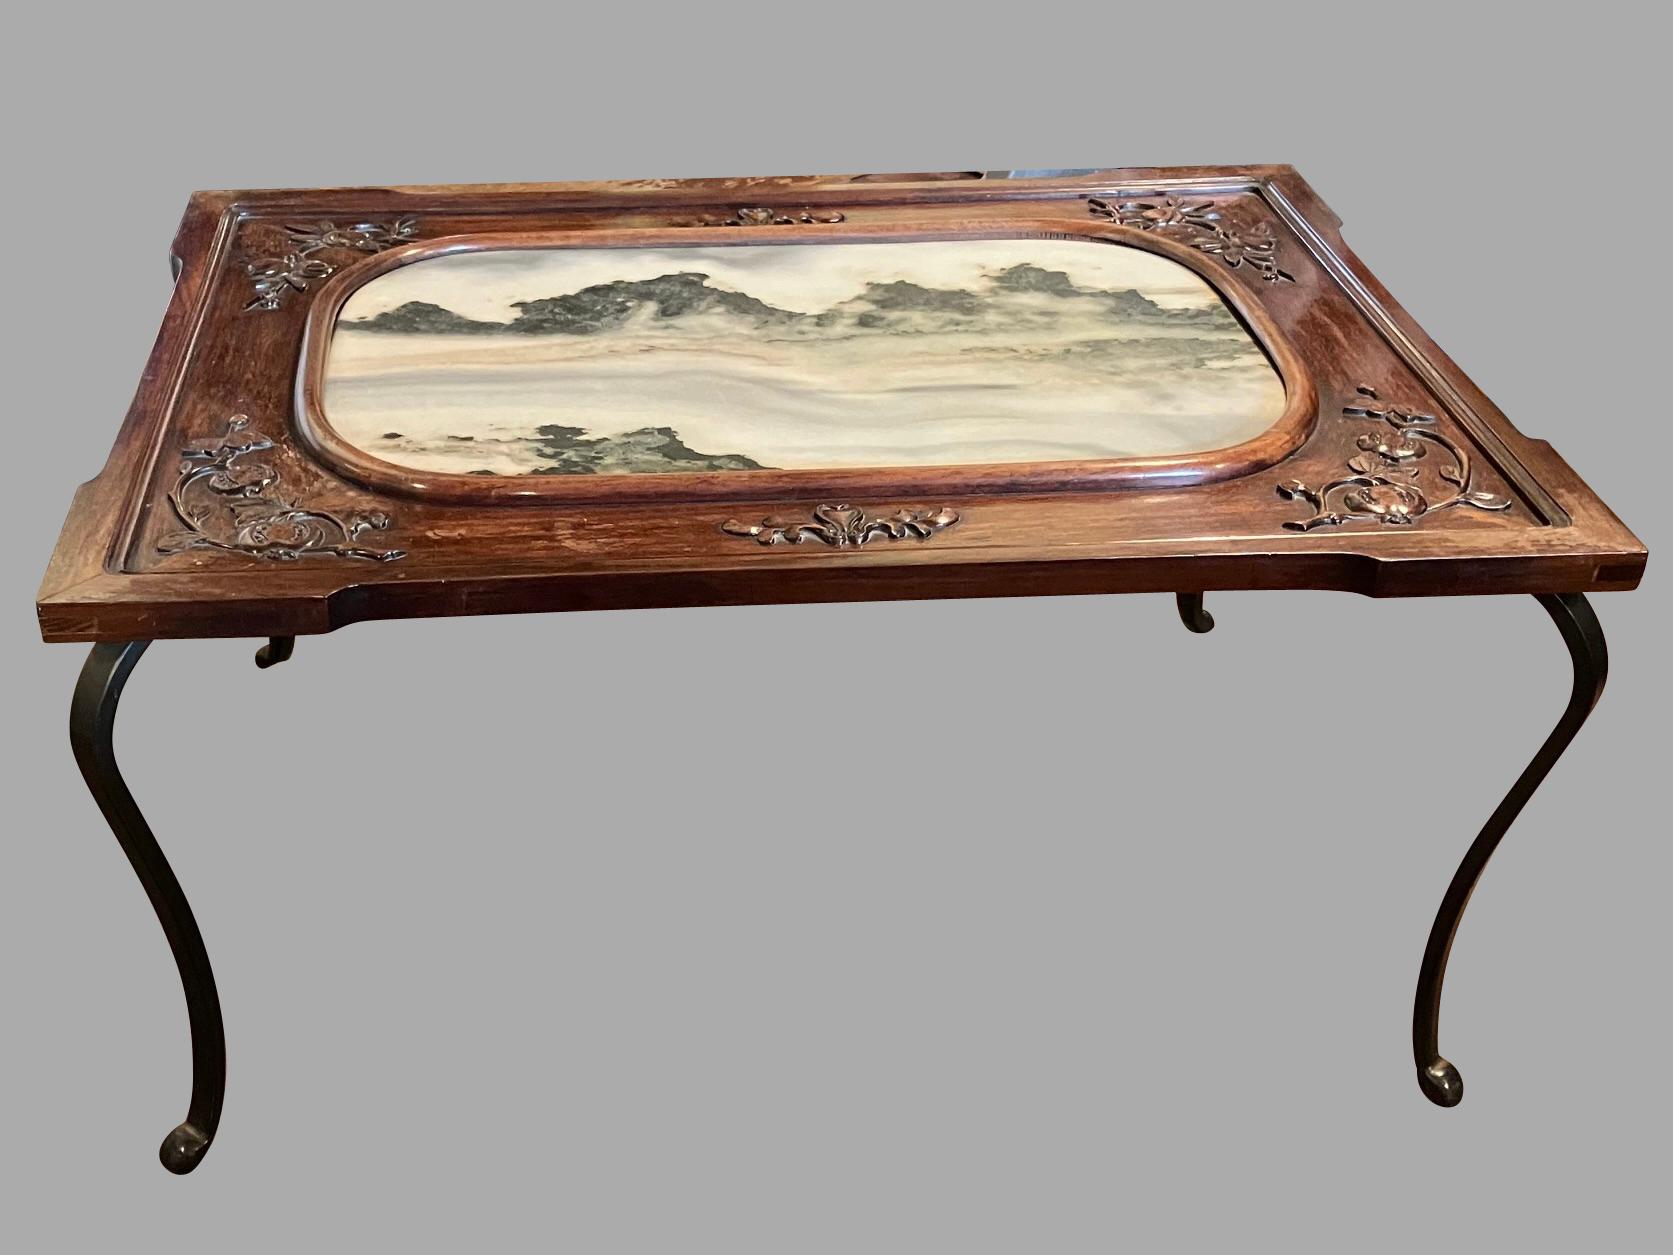 A beautiful custom made Chinese low table, the hardwood top with a central marble inset depicting a stylized pastoral mountain landscape, supported by steel cabriole legs. The marble center is surrounded by a lovely foliate carved hardwood frame